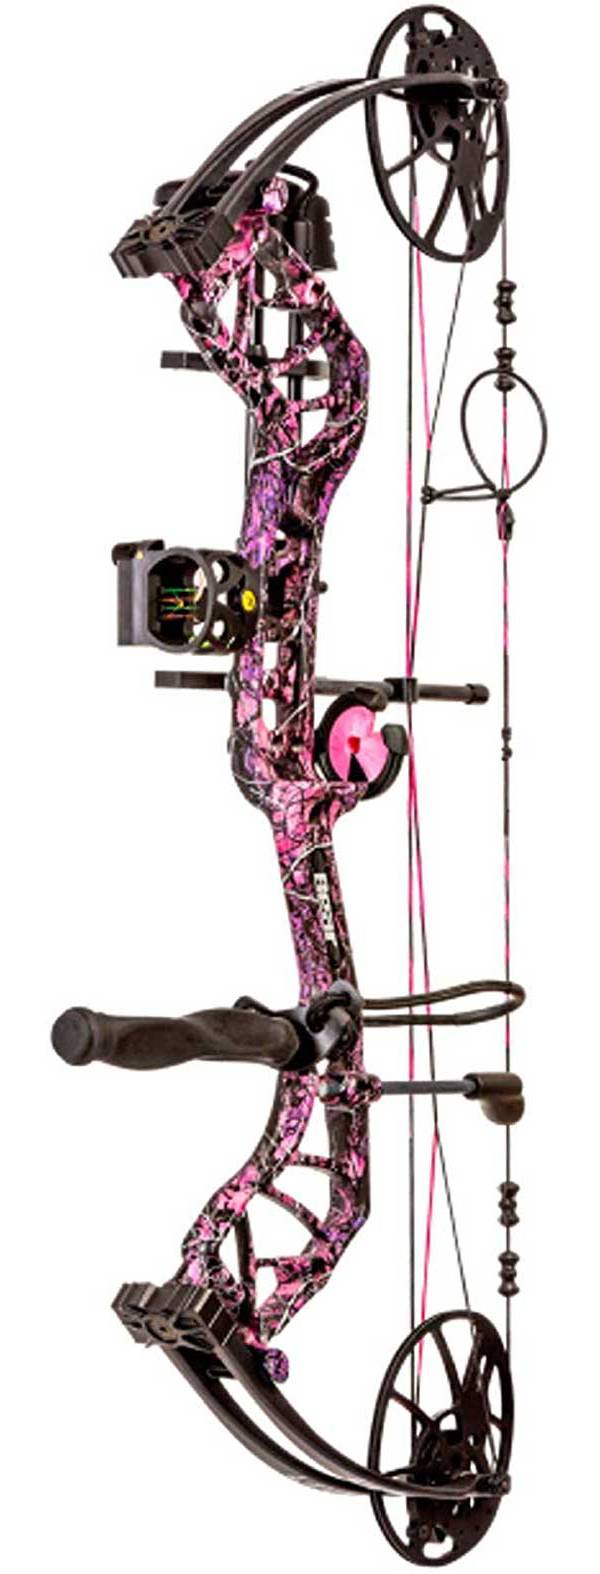 Bear Archery Legit Compound Bow Package product image